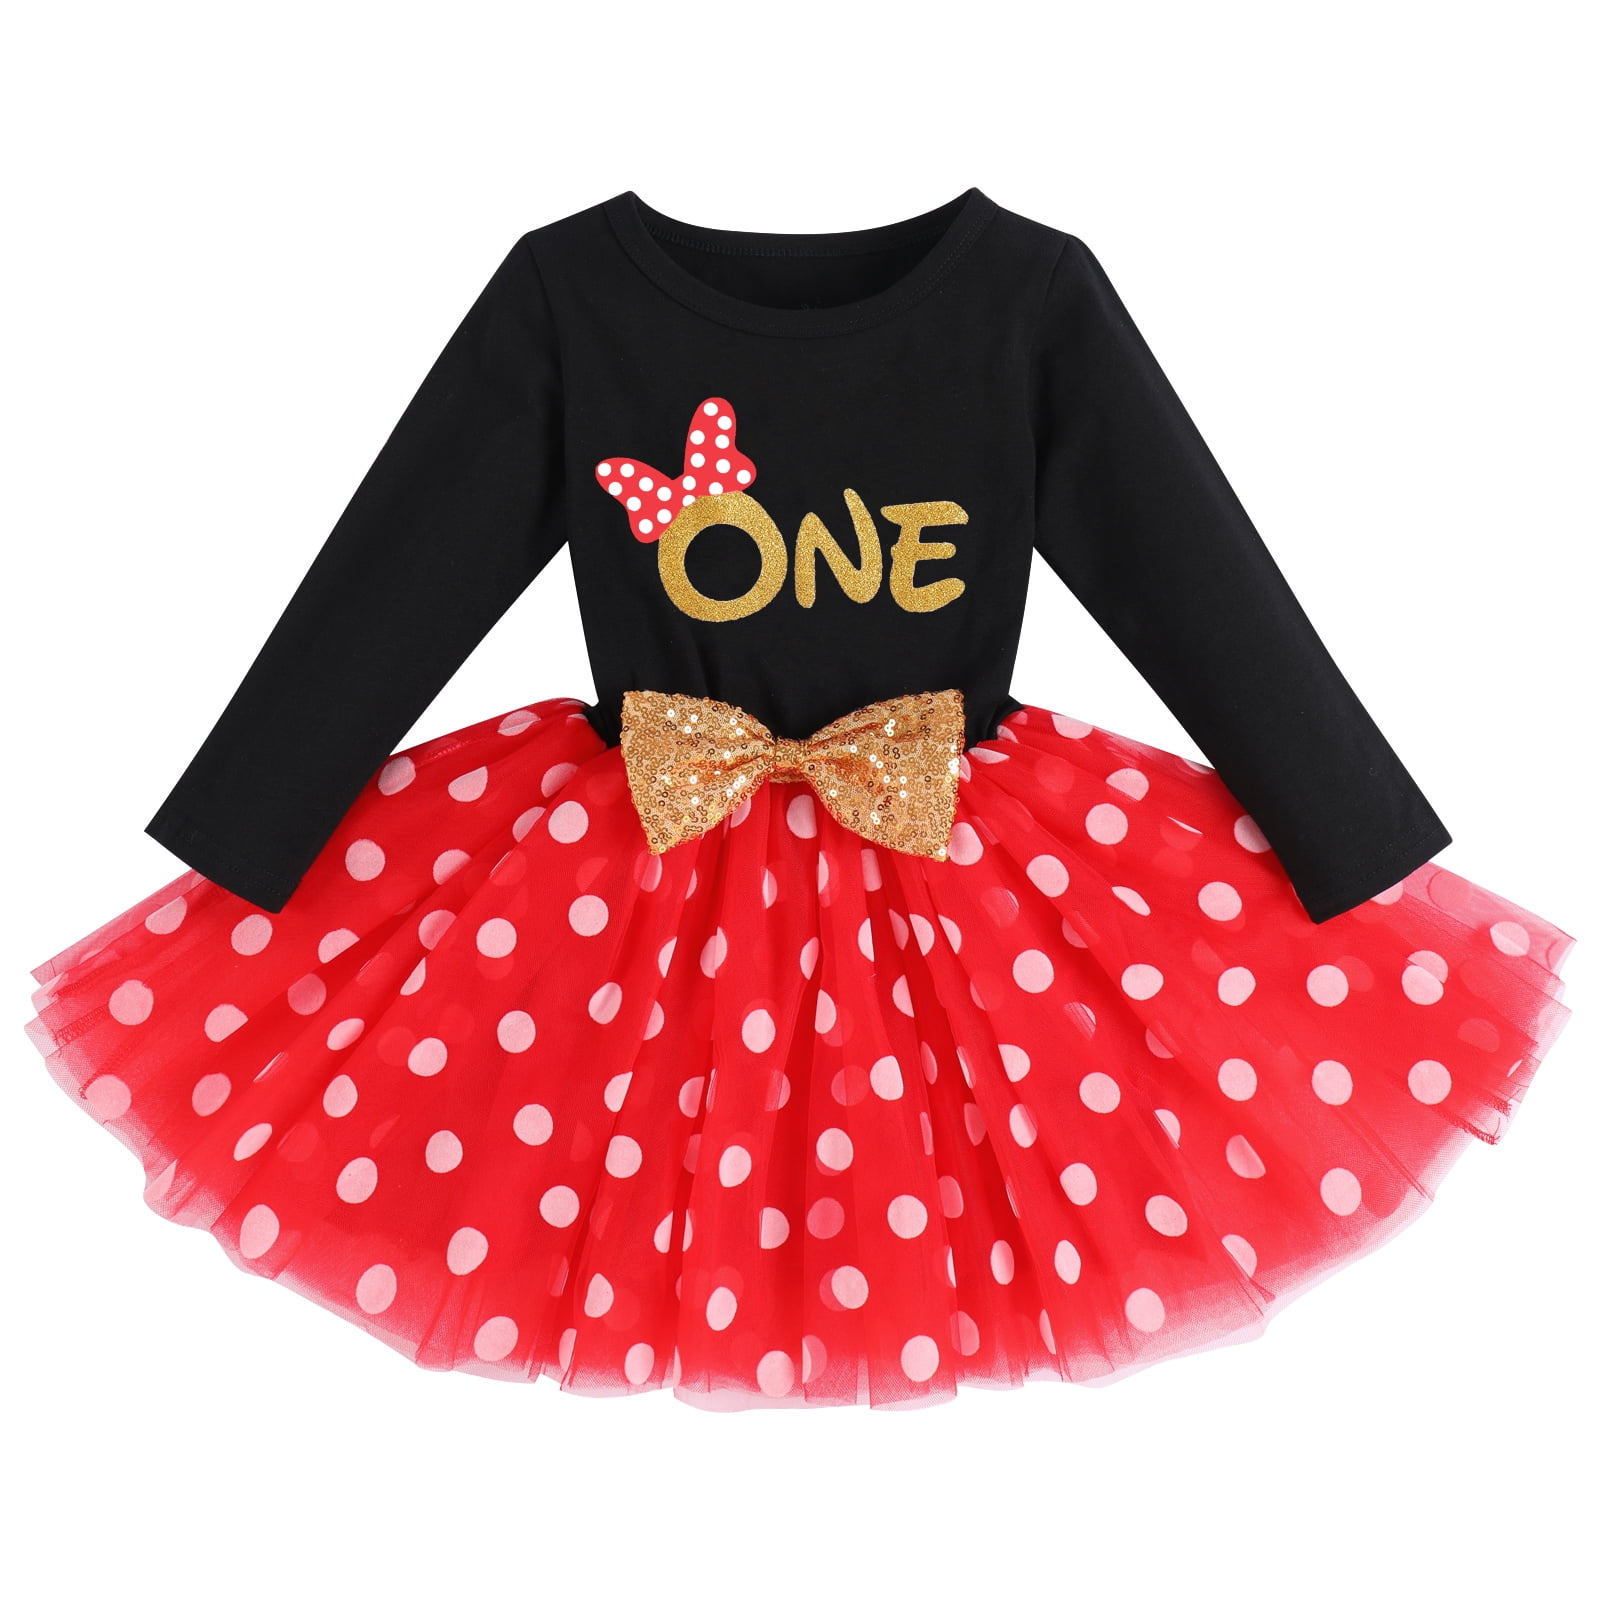 Pink Minnie Mouse Inspired Costume,halloween Costume Tutu Dress,pink Minnie  Mouse Baby Dress,1stbirthday Costume,photoshoot Costume 